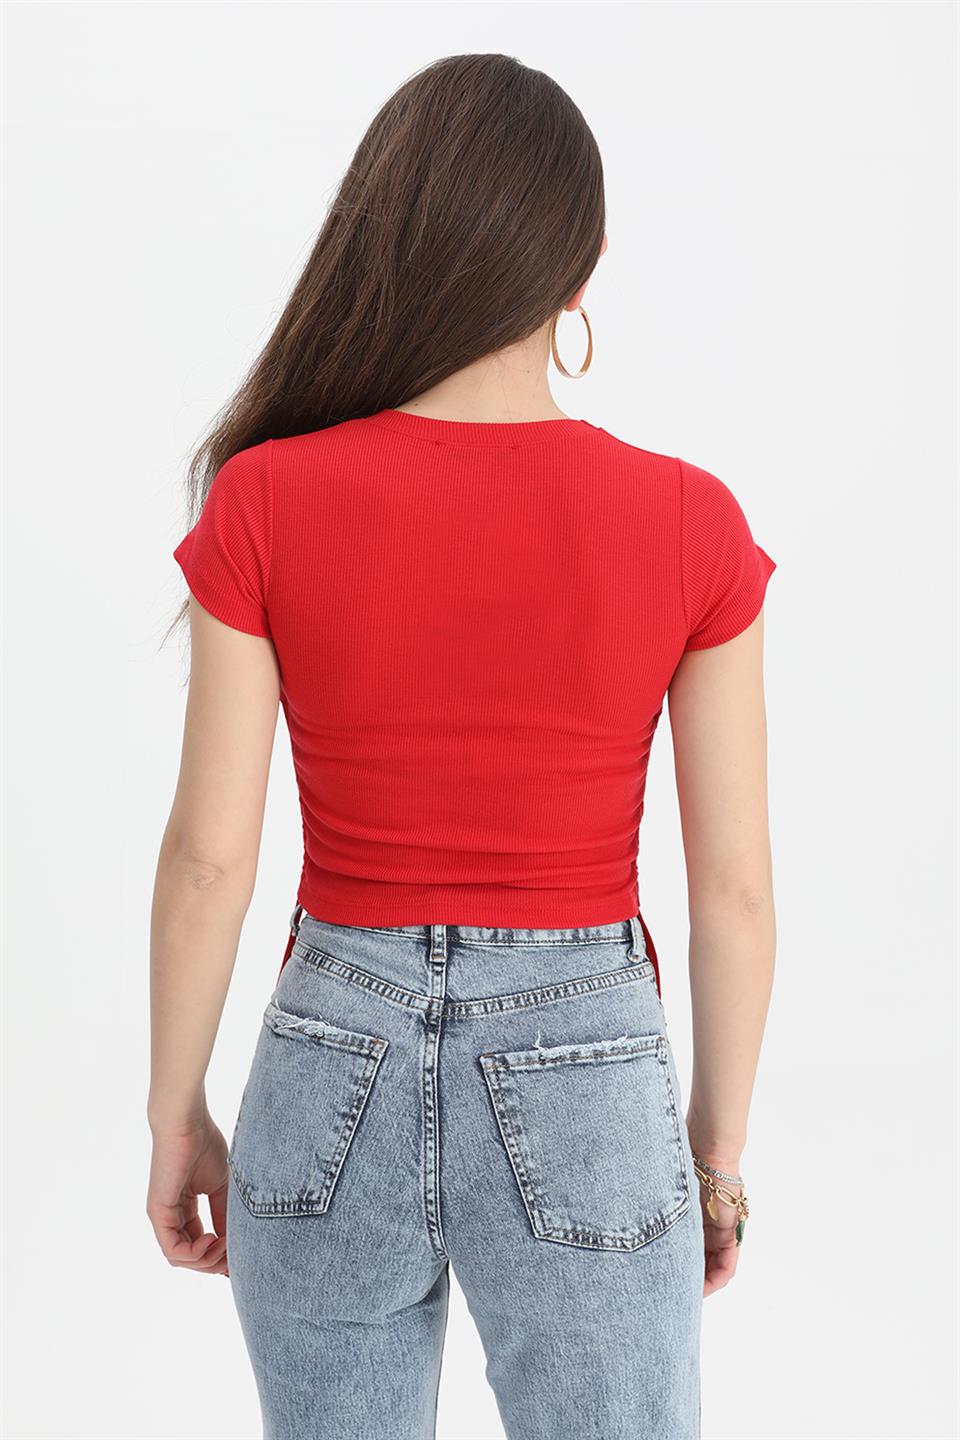 Women's Blouse Crew Neck Pleated Sides - Red - STREET MODE ™